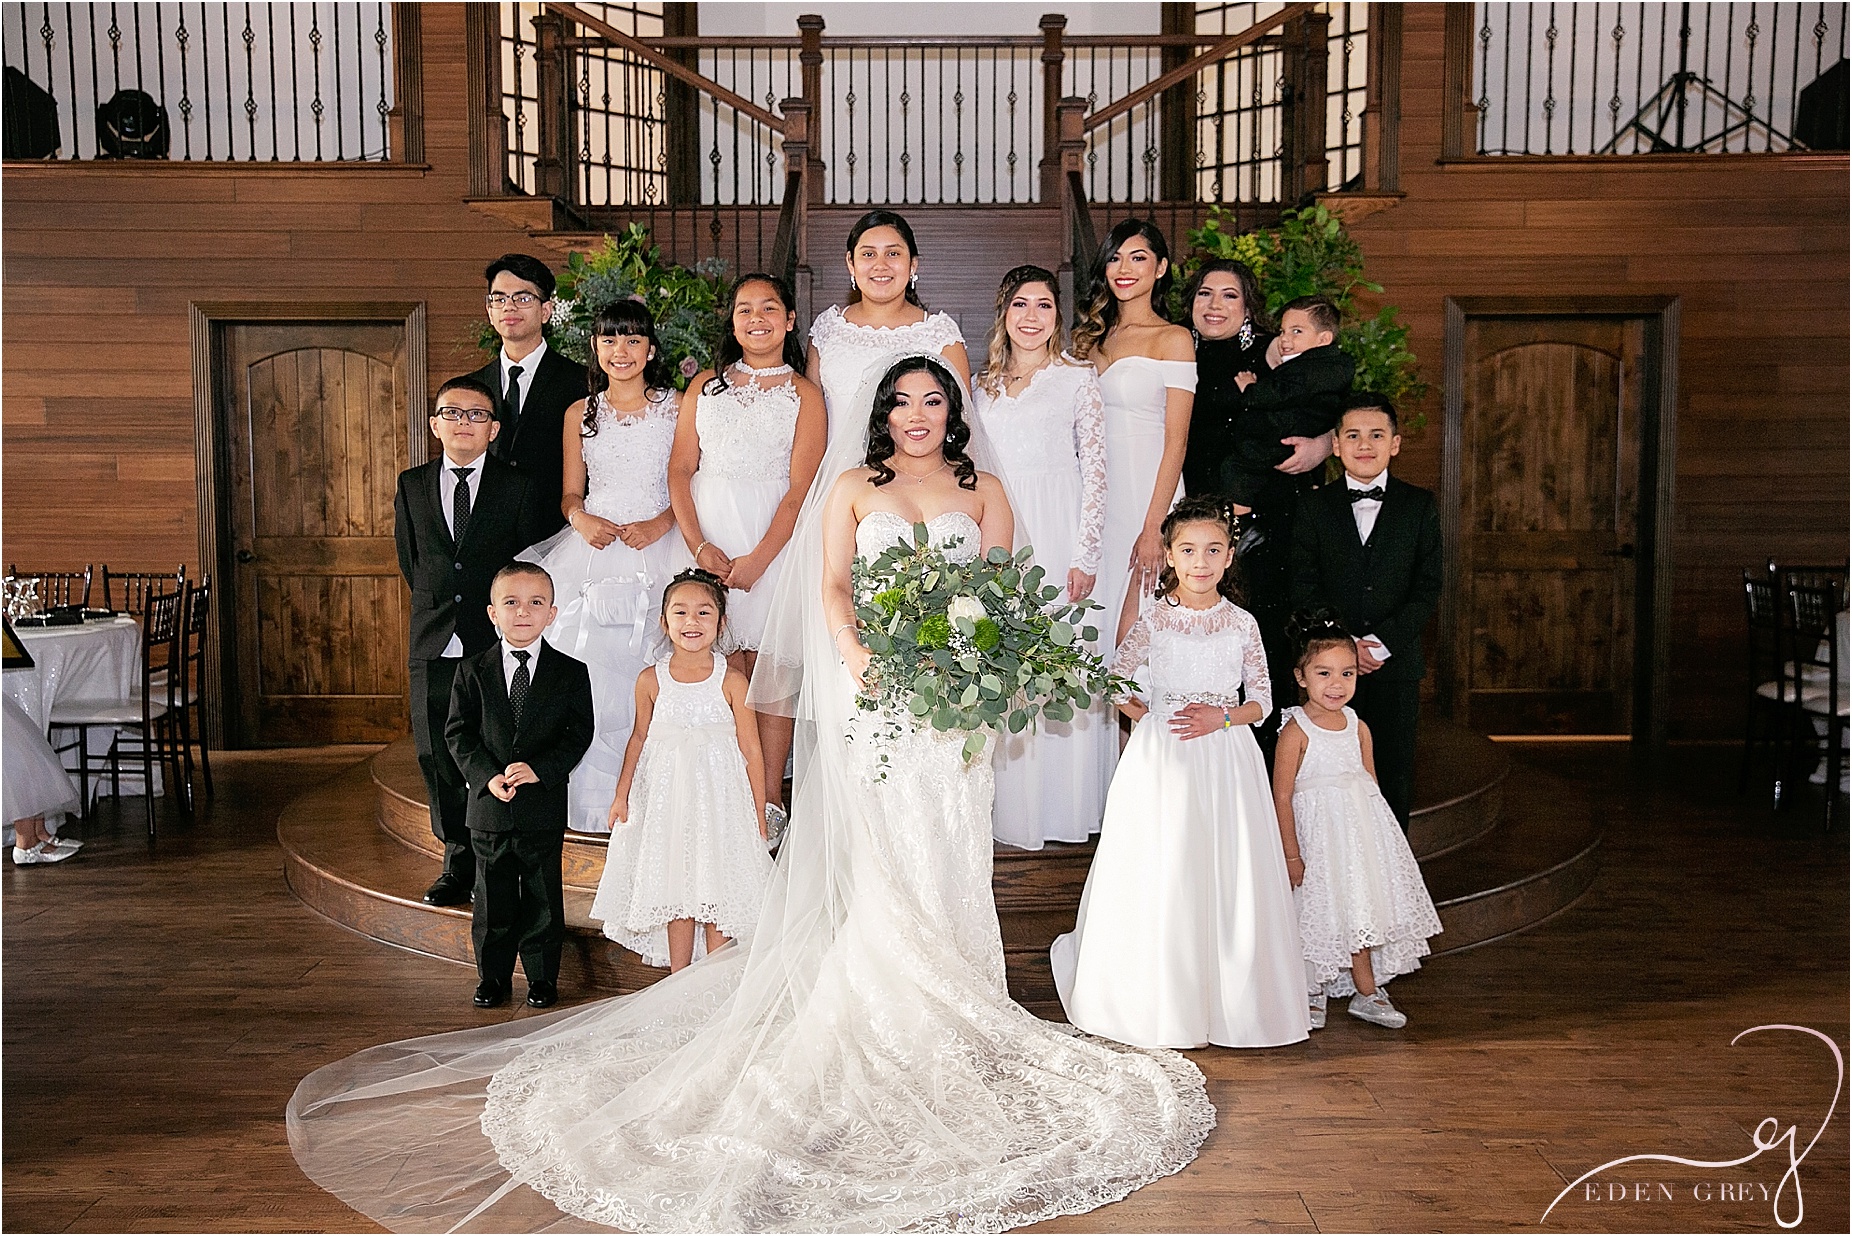 The bride with all of her nieces and nephews